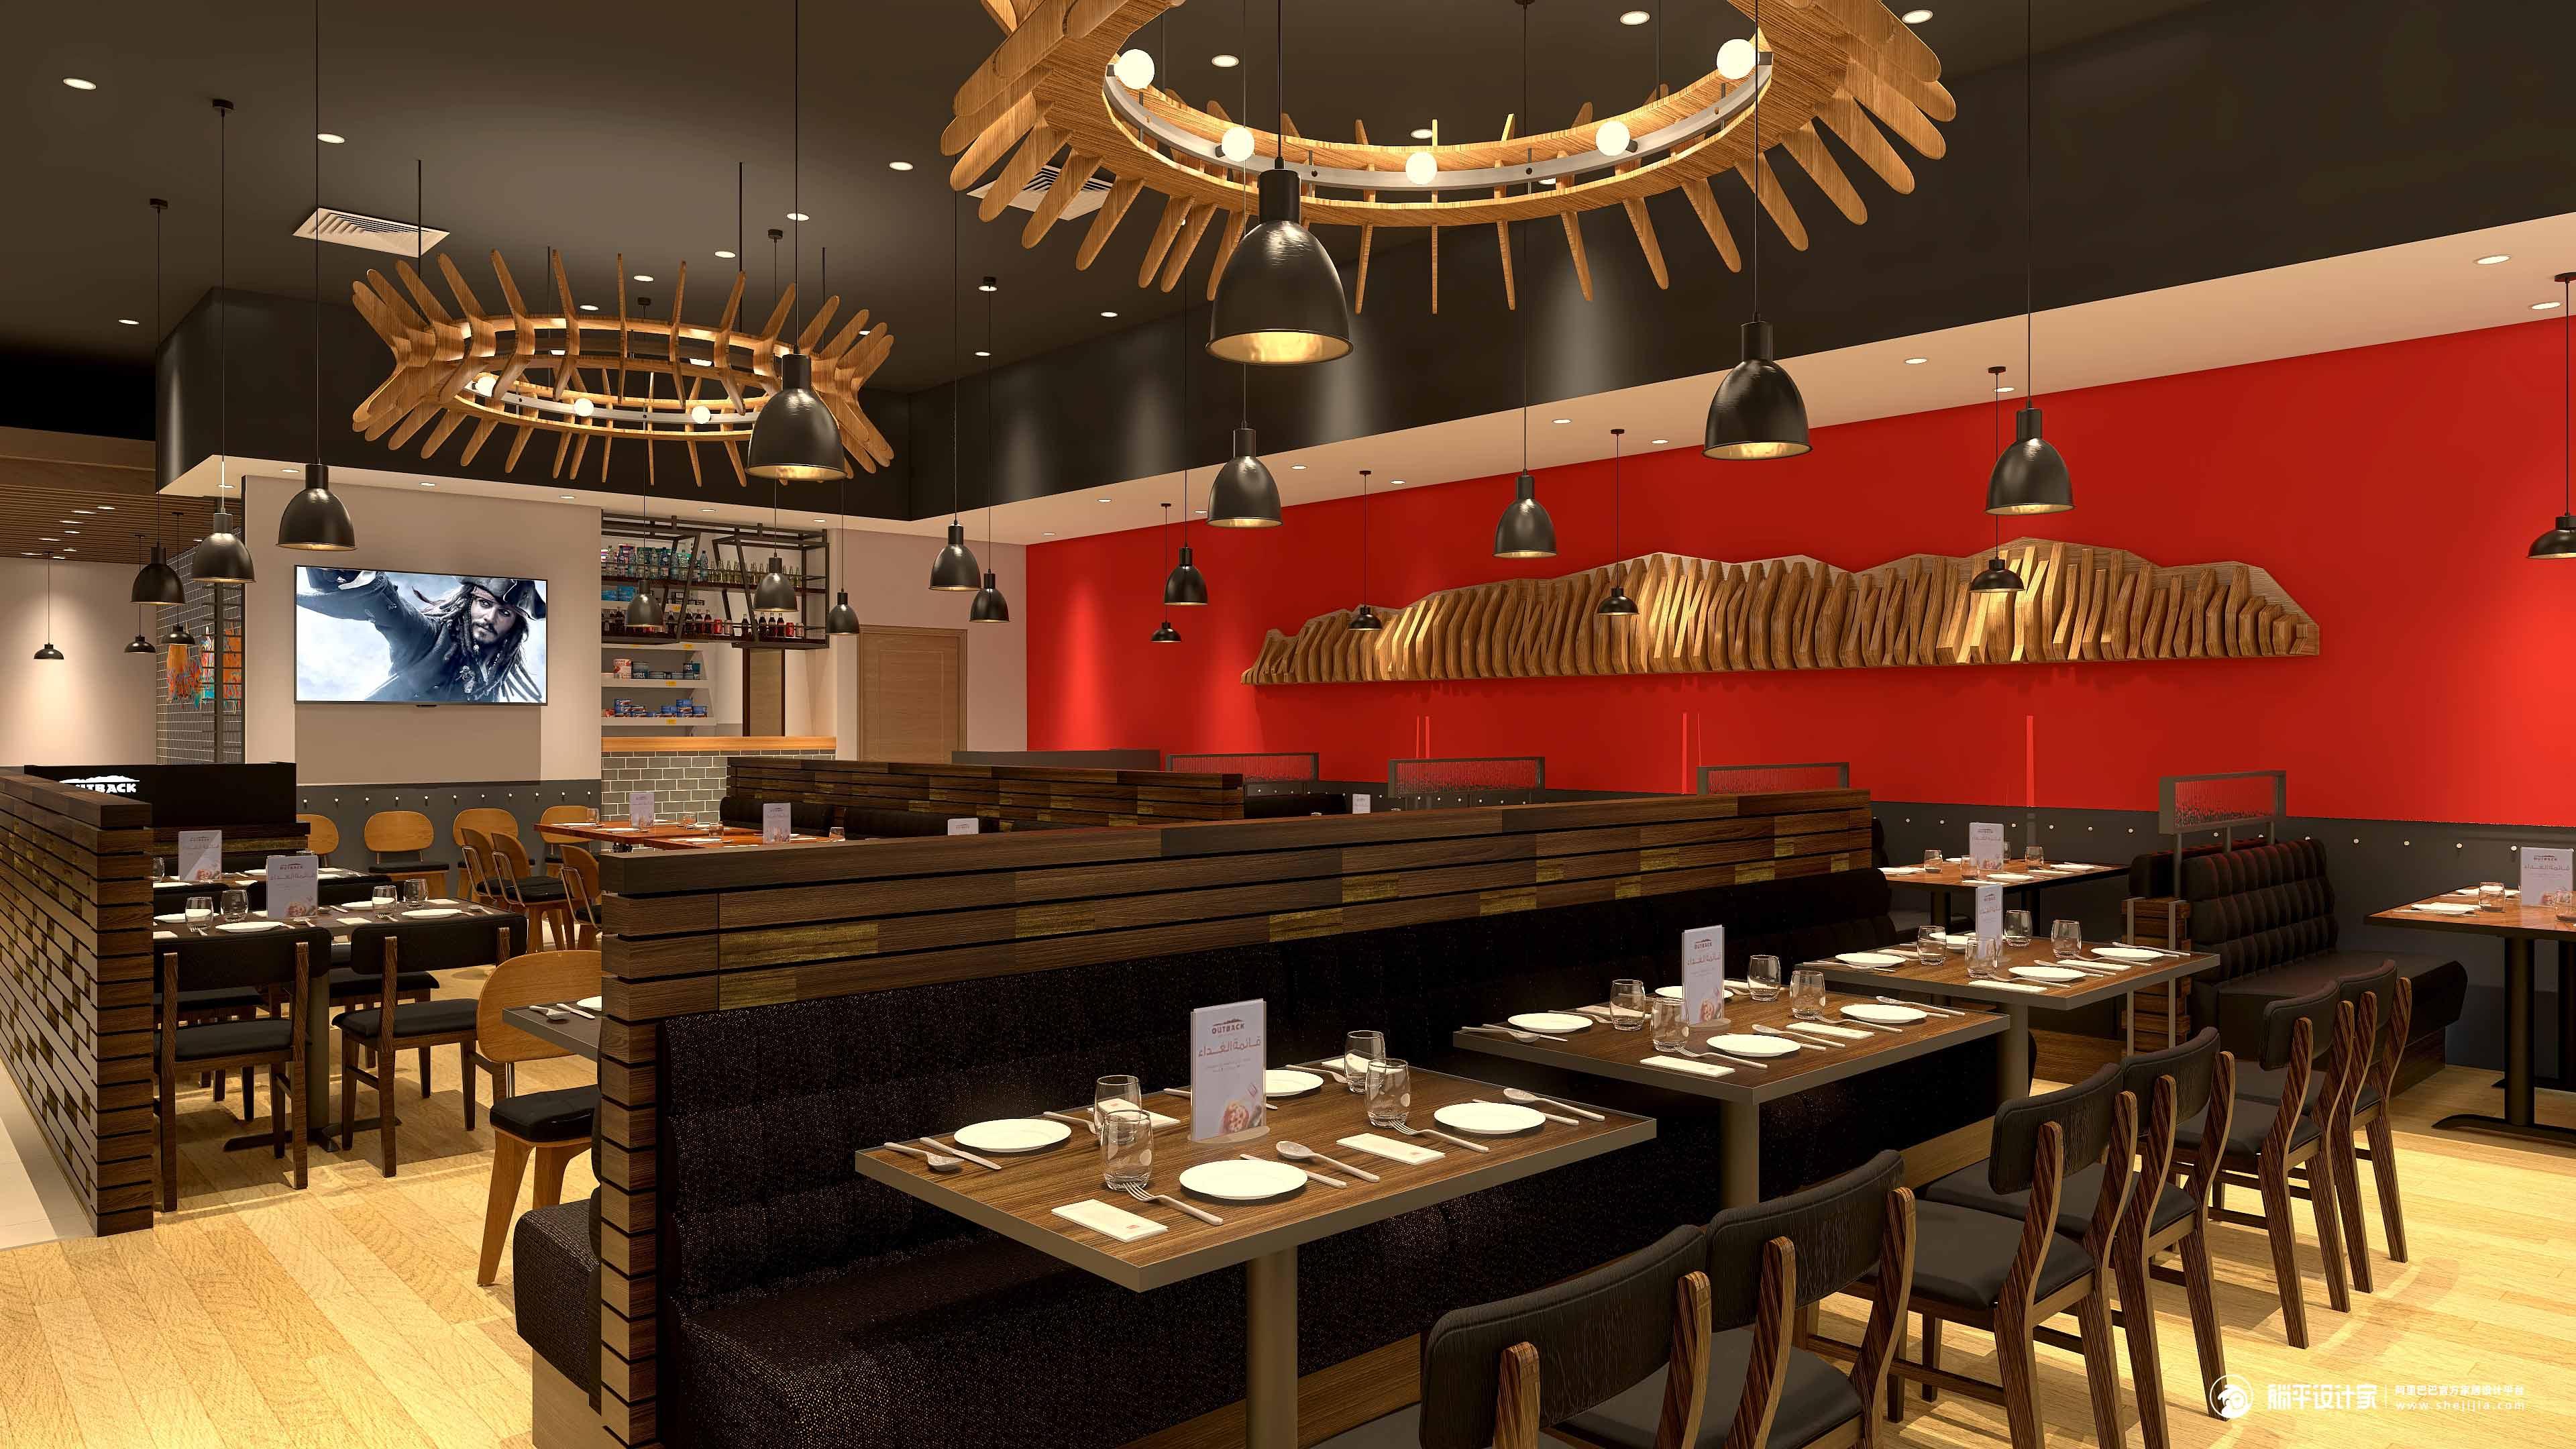 Click the link to view the 3D restaurant panorama pattarn example.